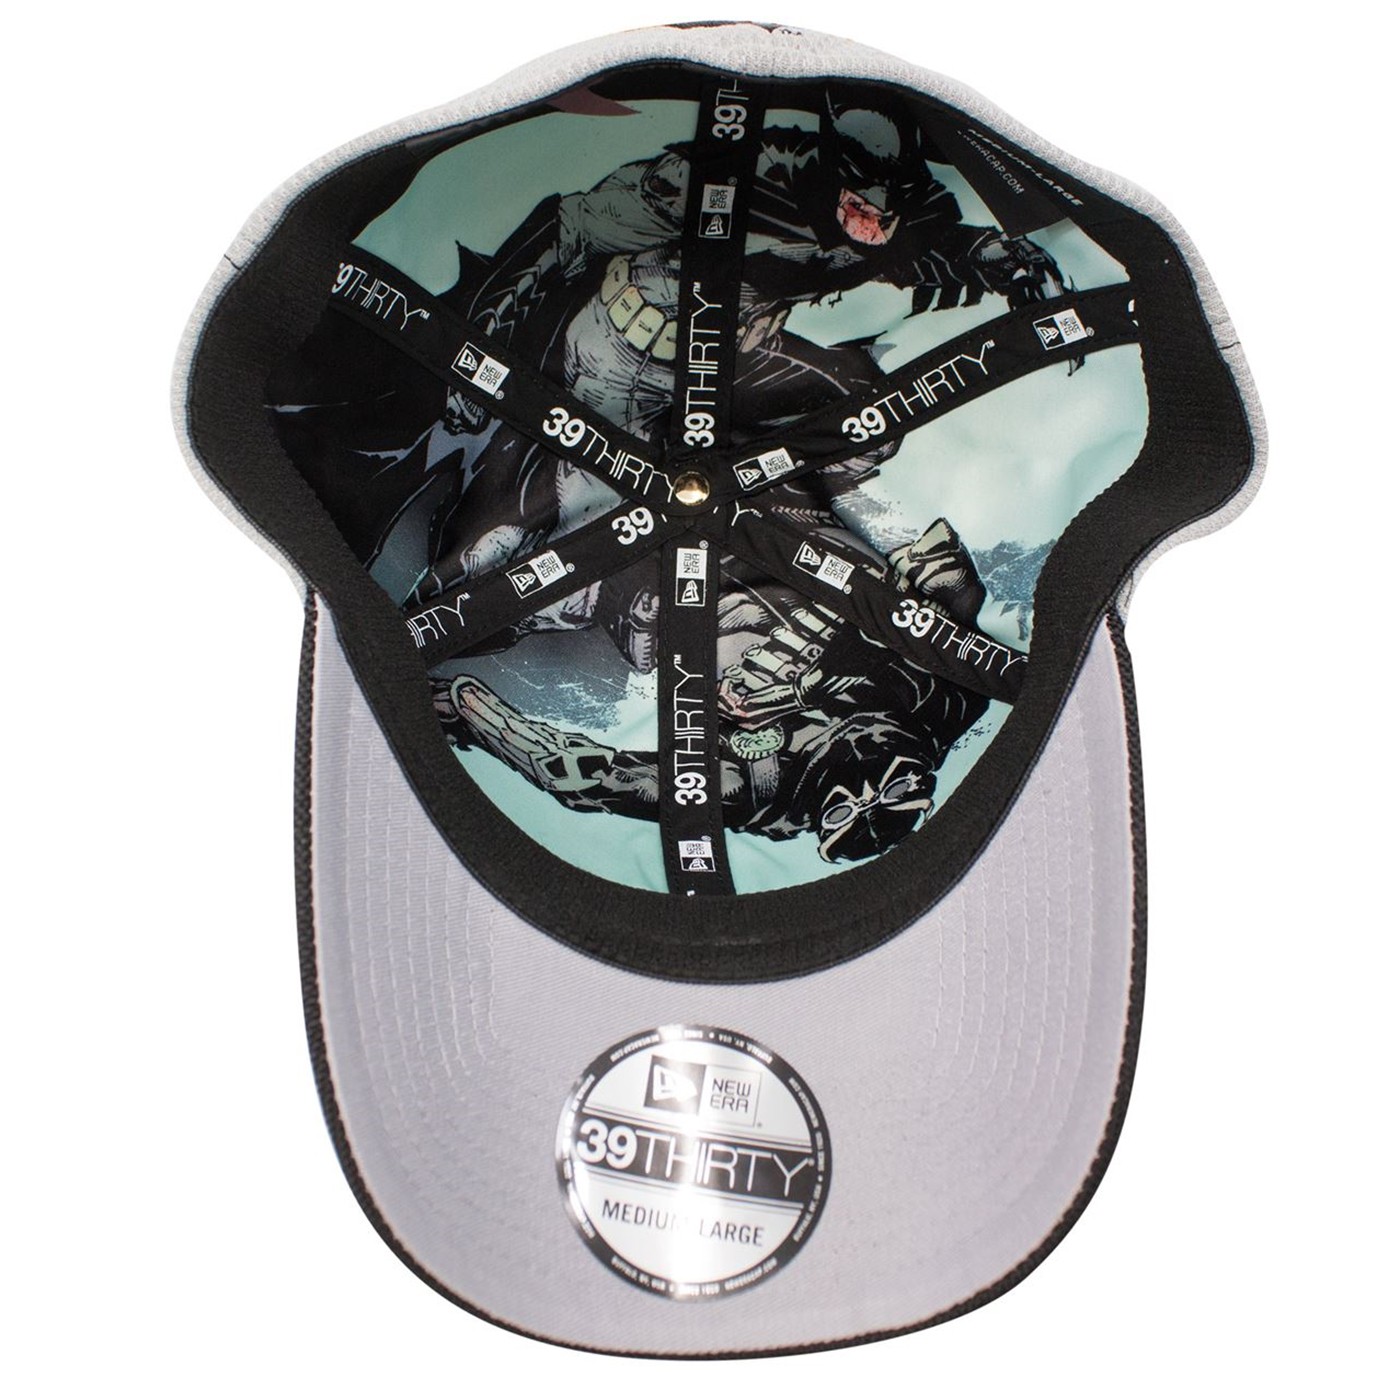 Batman Hush Armor with Court of Owls Lining 39Thirty Fitted Hat